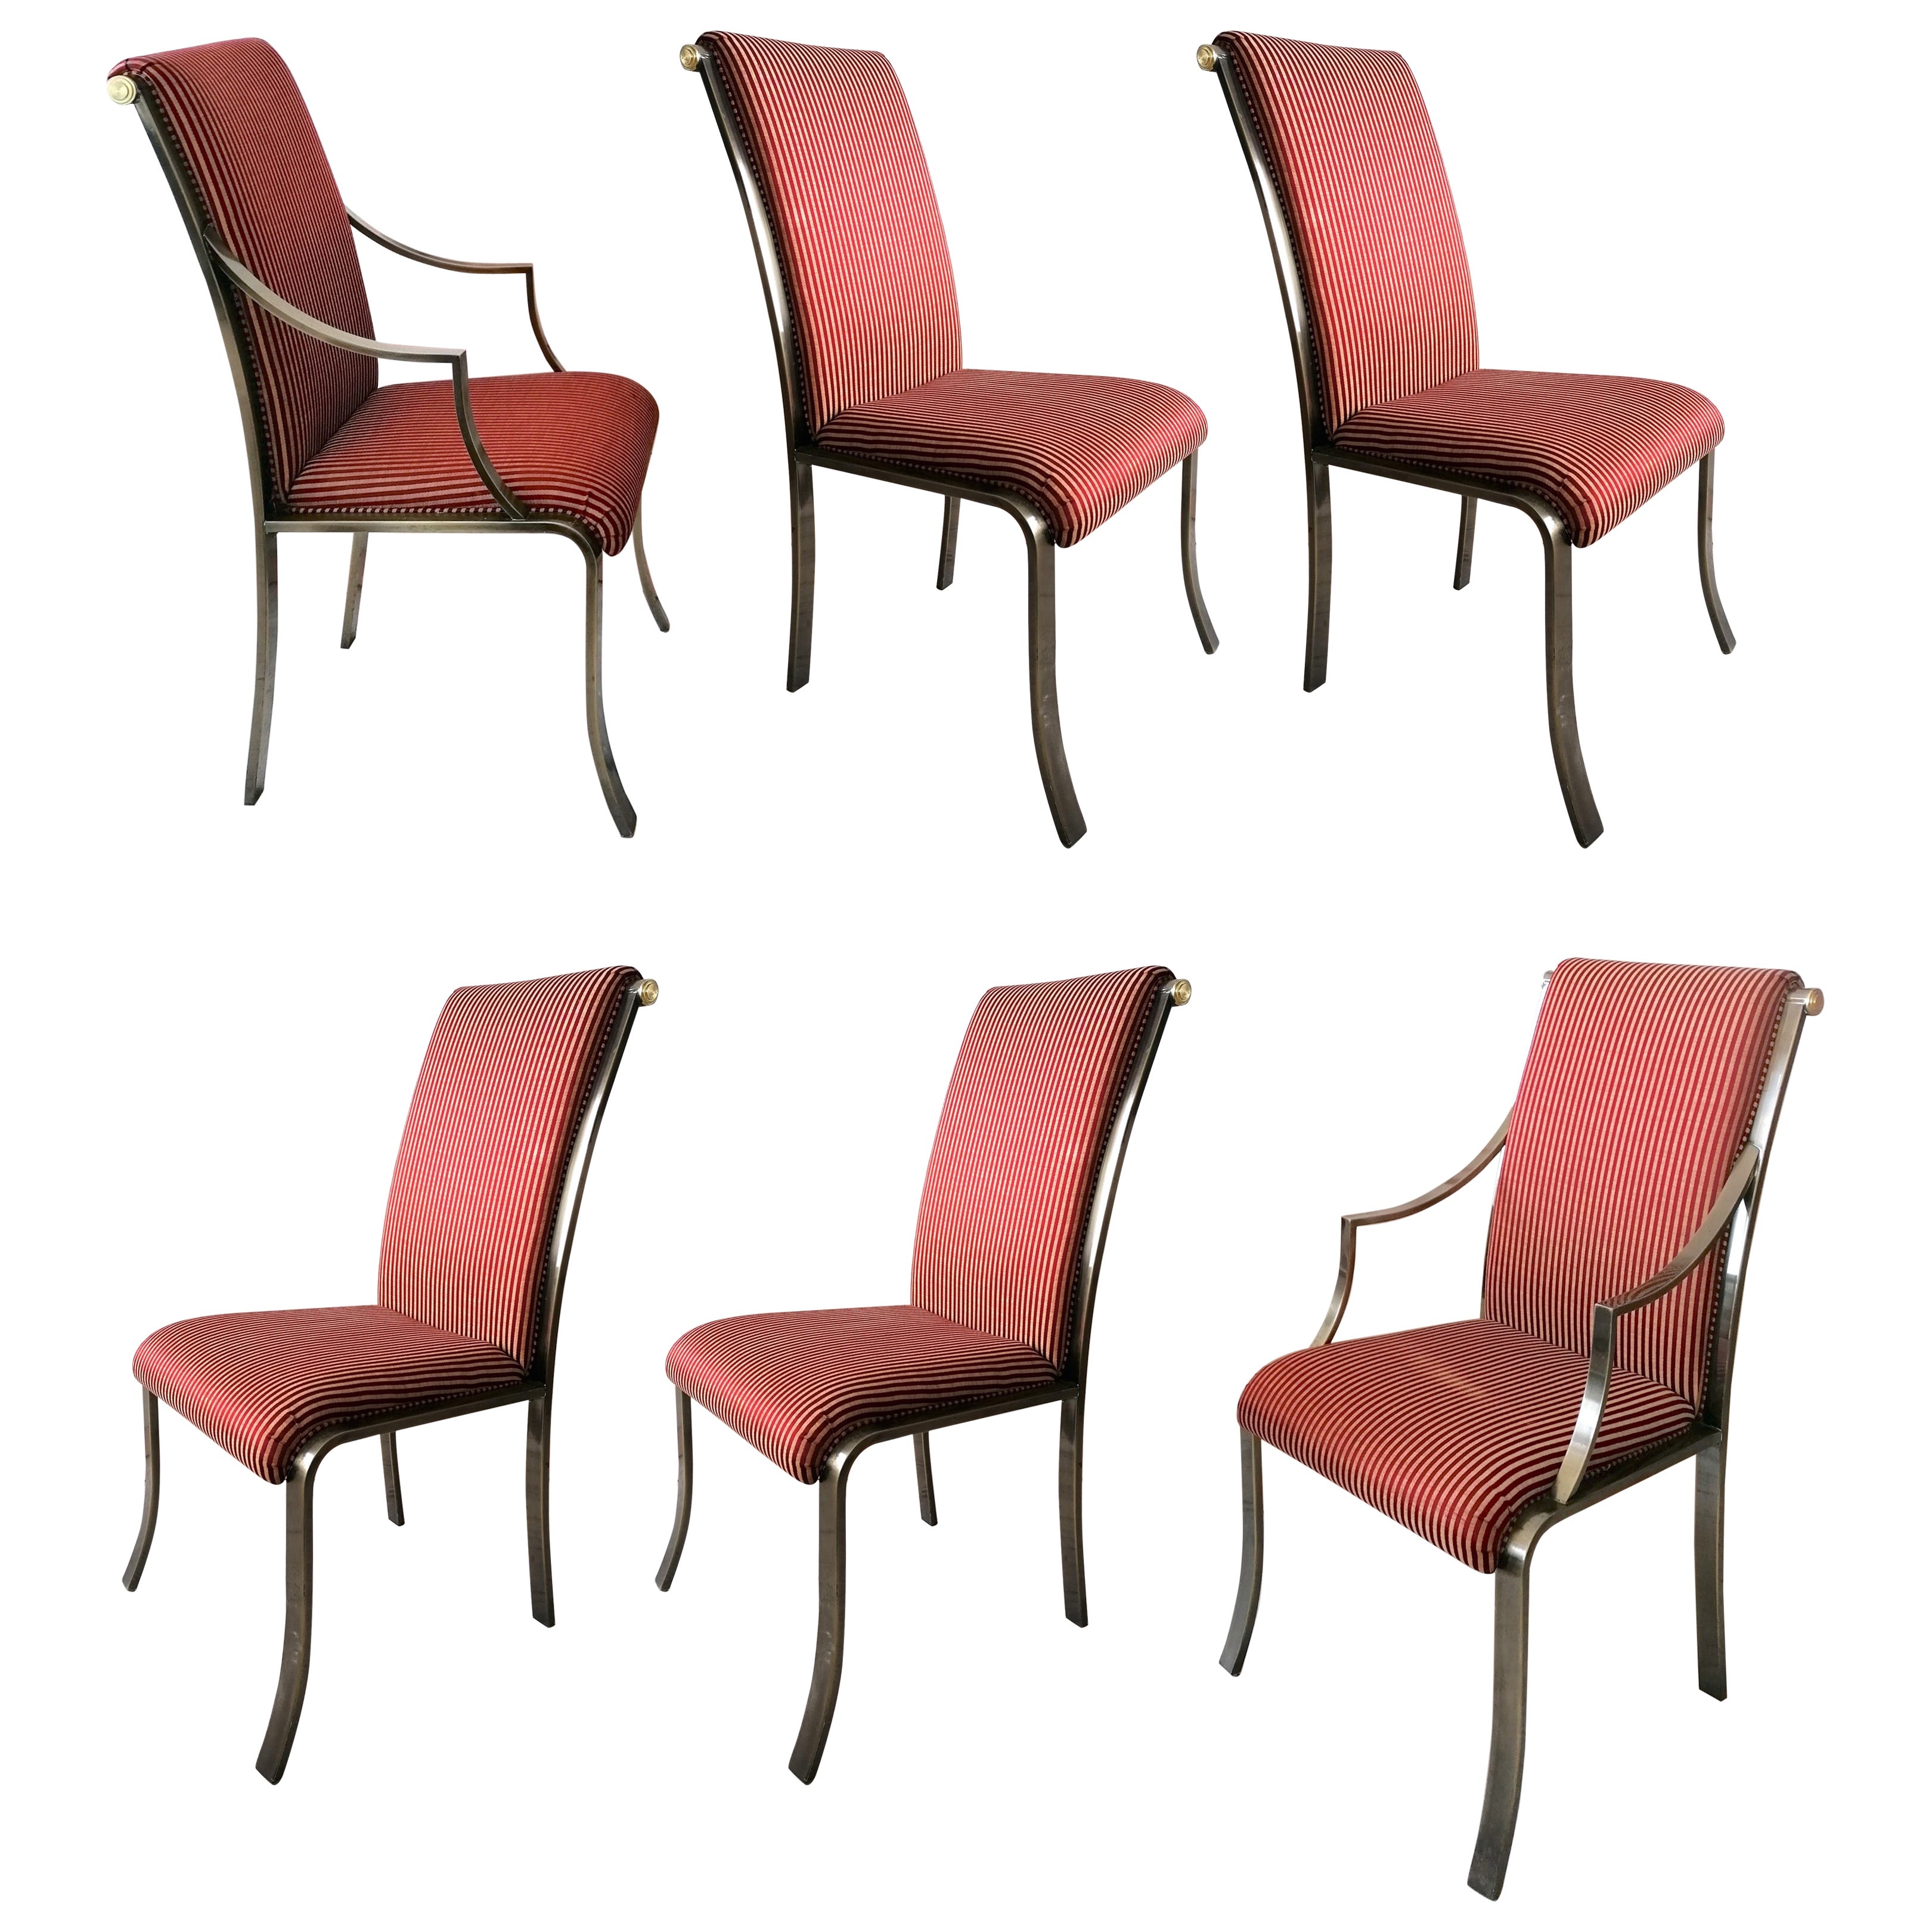 Set of 6 Dining Chairs by Design Institute of America, 1980s, Attr Milo Baughman